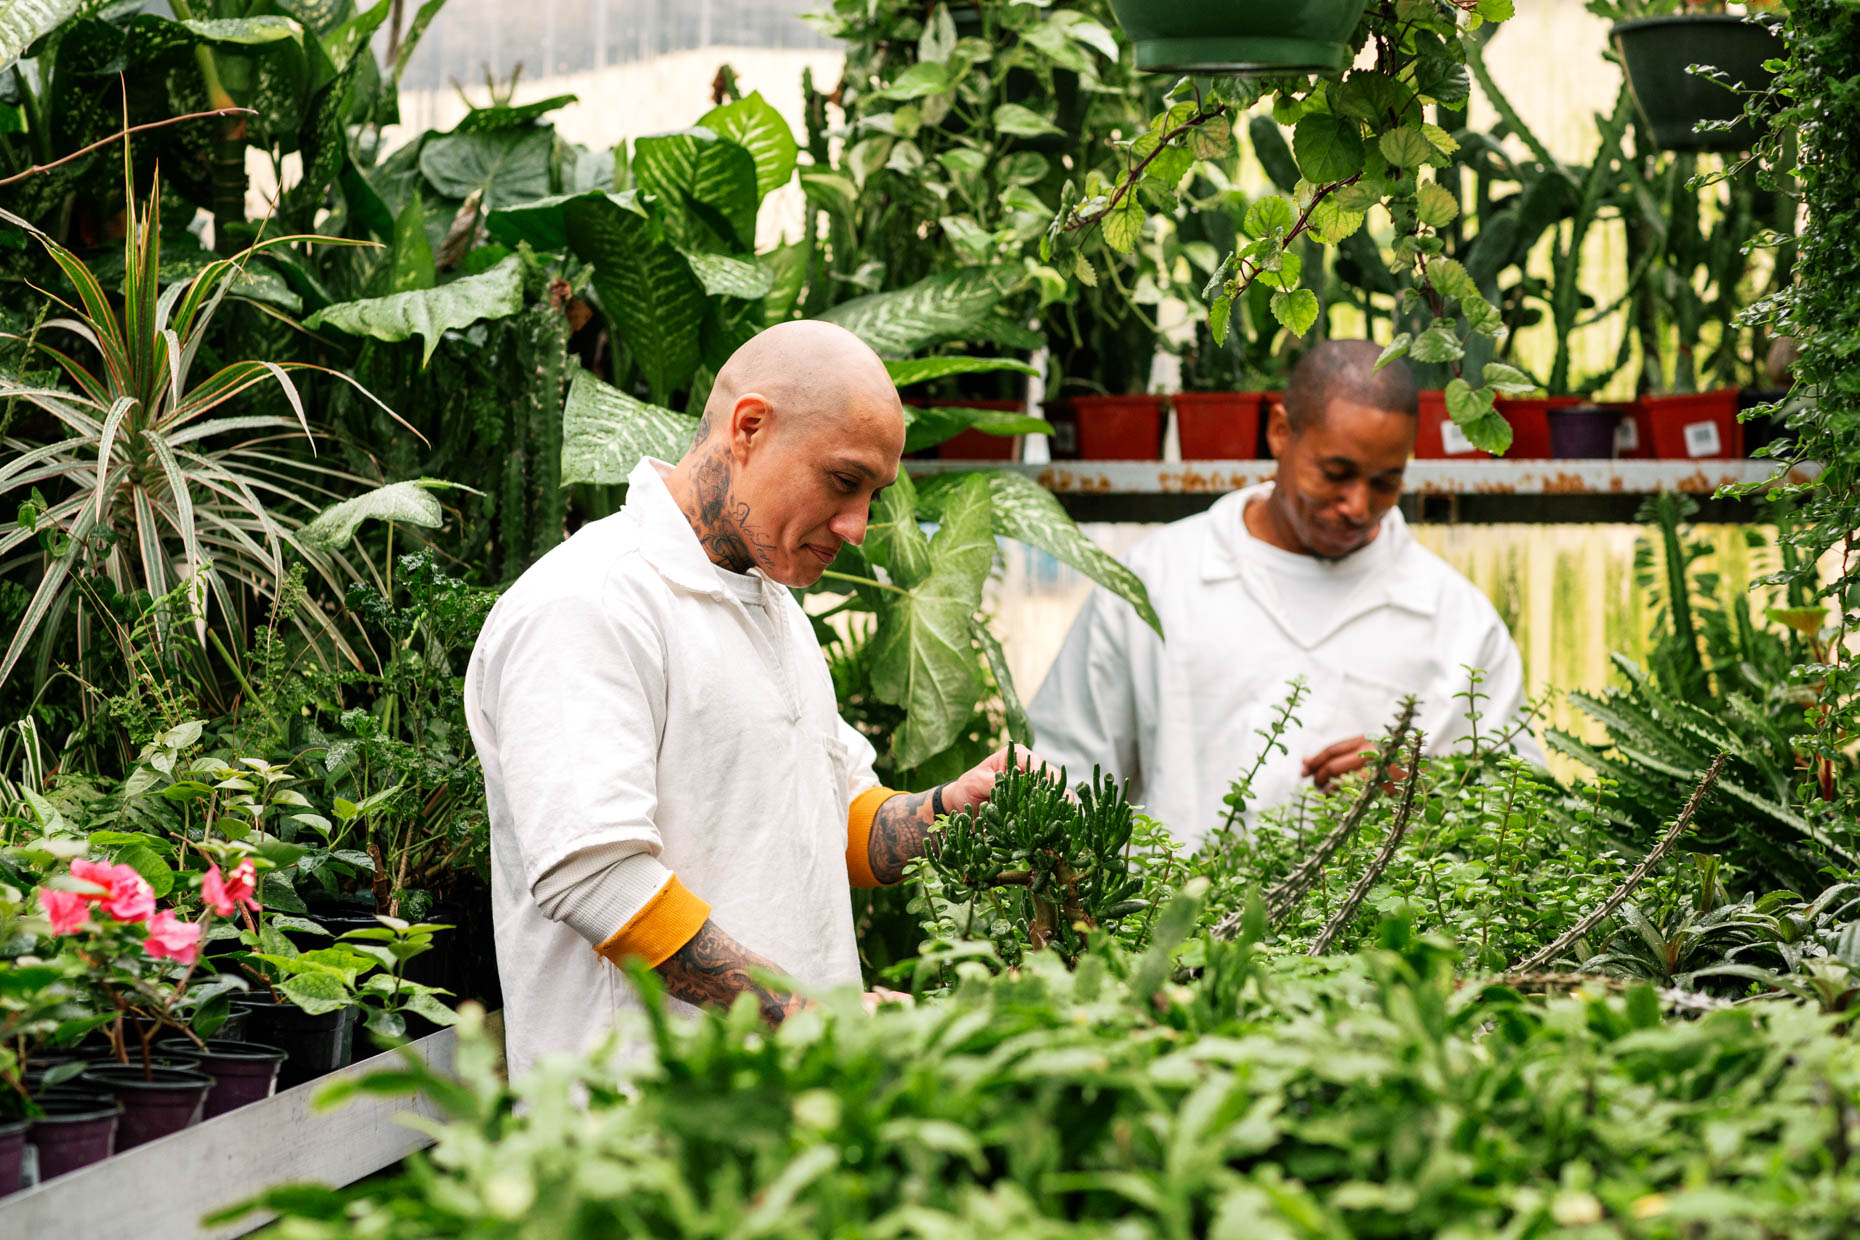 Two Texas prison inmates working in a greenhouse as part of a horticulture class 